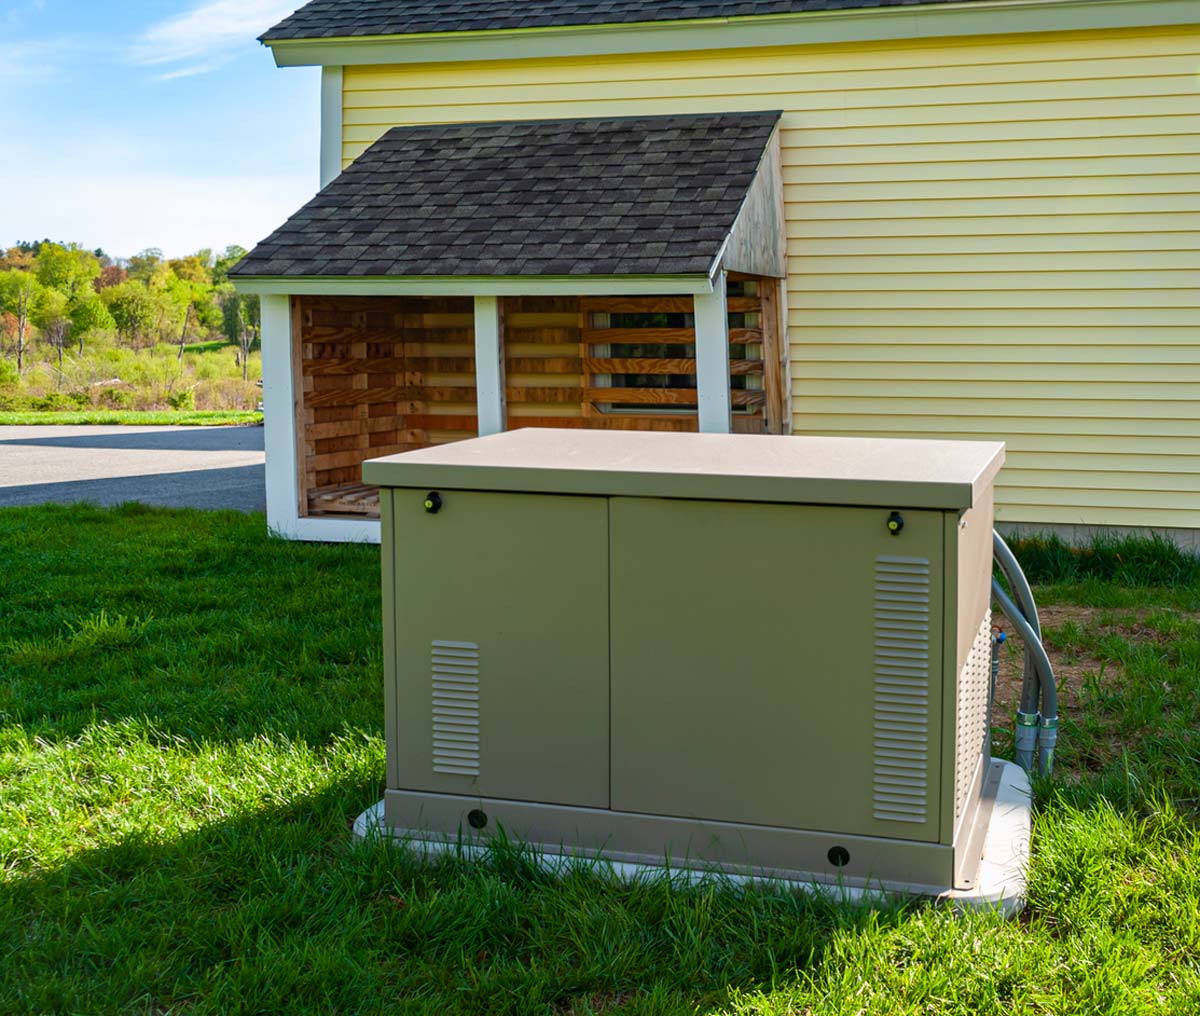 How to Safely Maintain an Emergency Power Generator